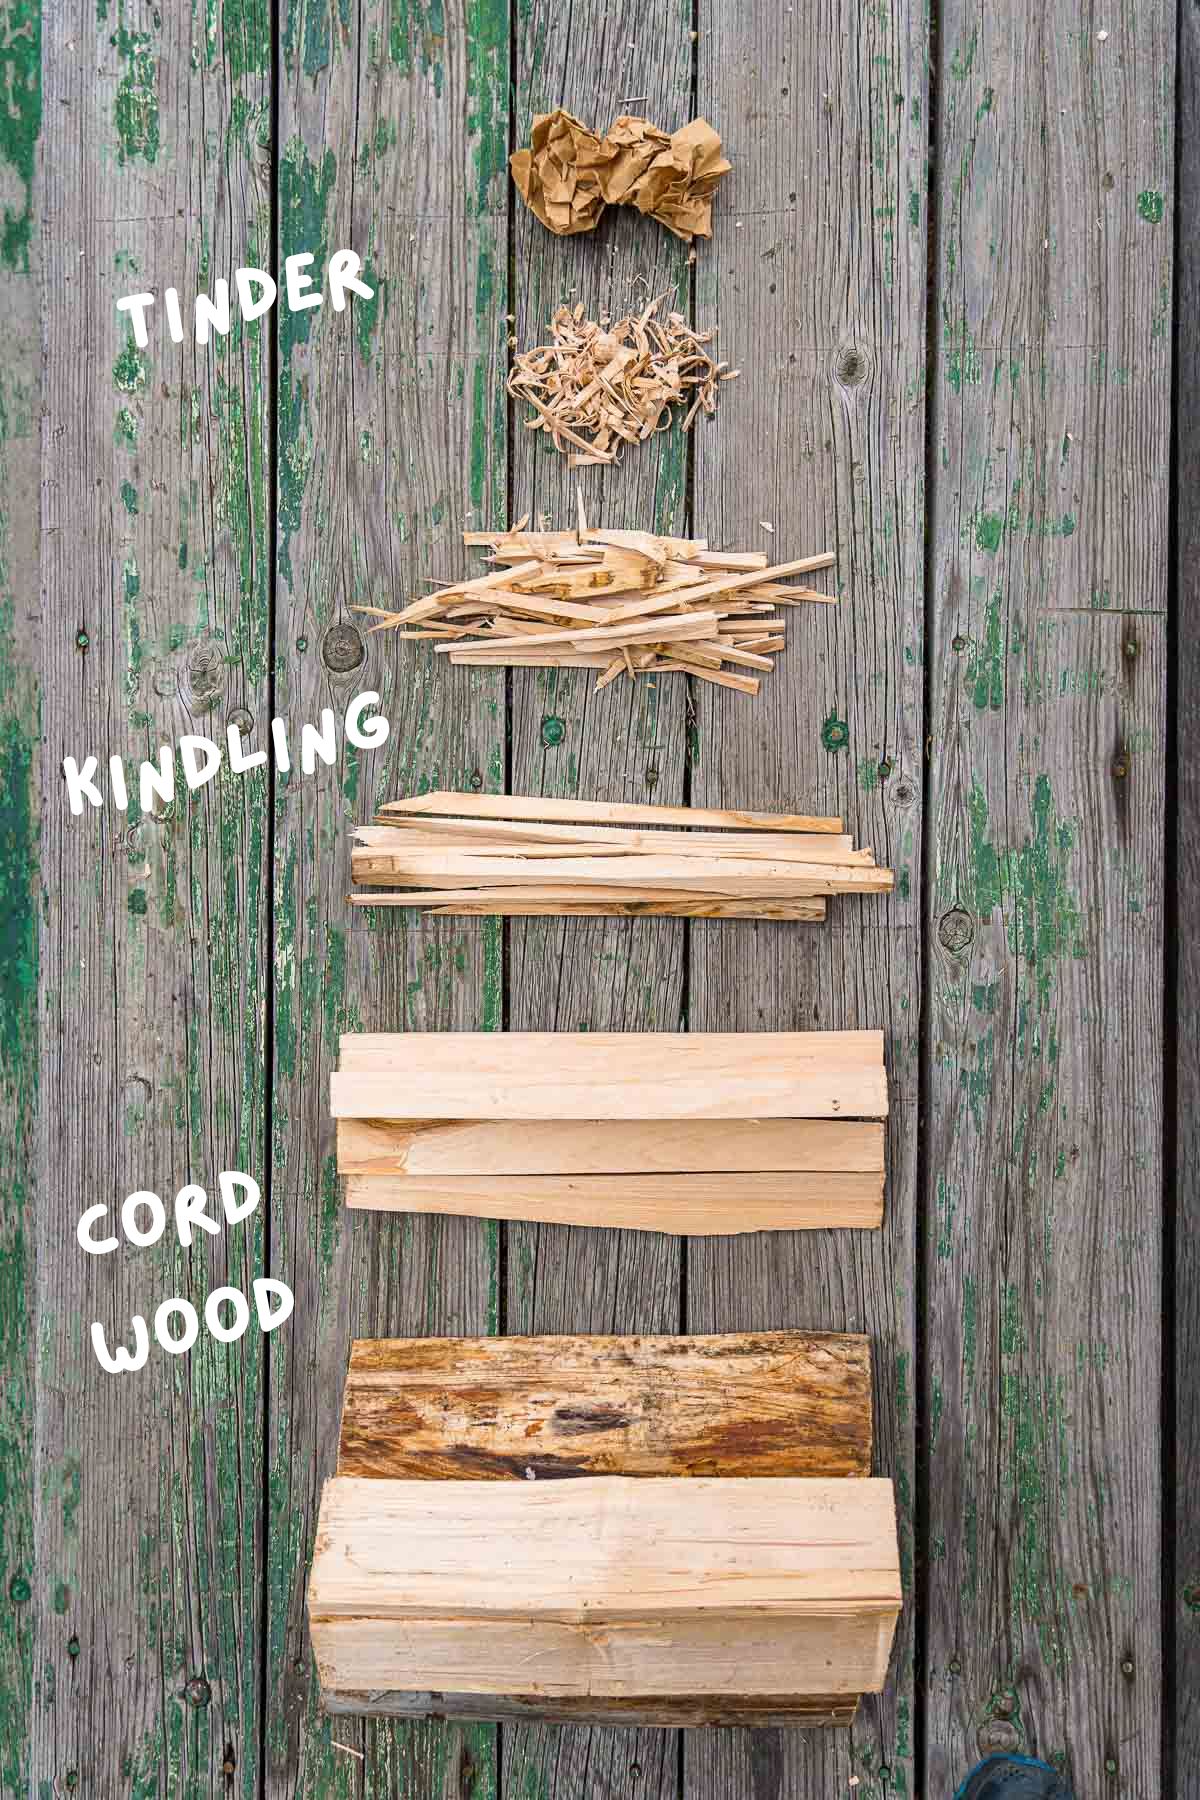 Examples of tinder, kindling, and cord wood